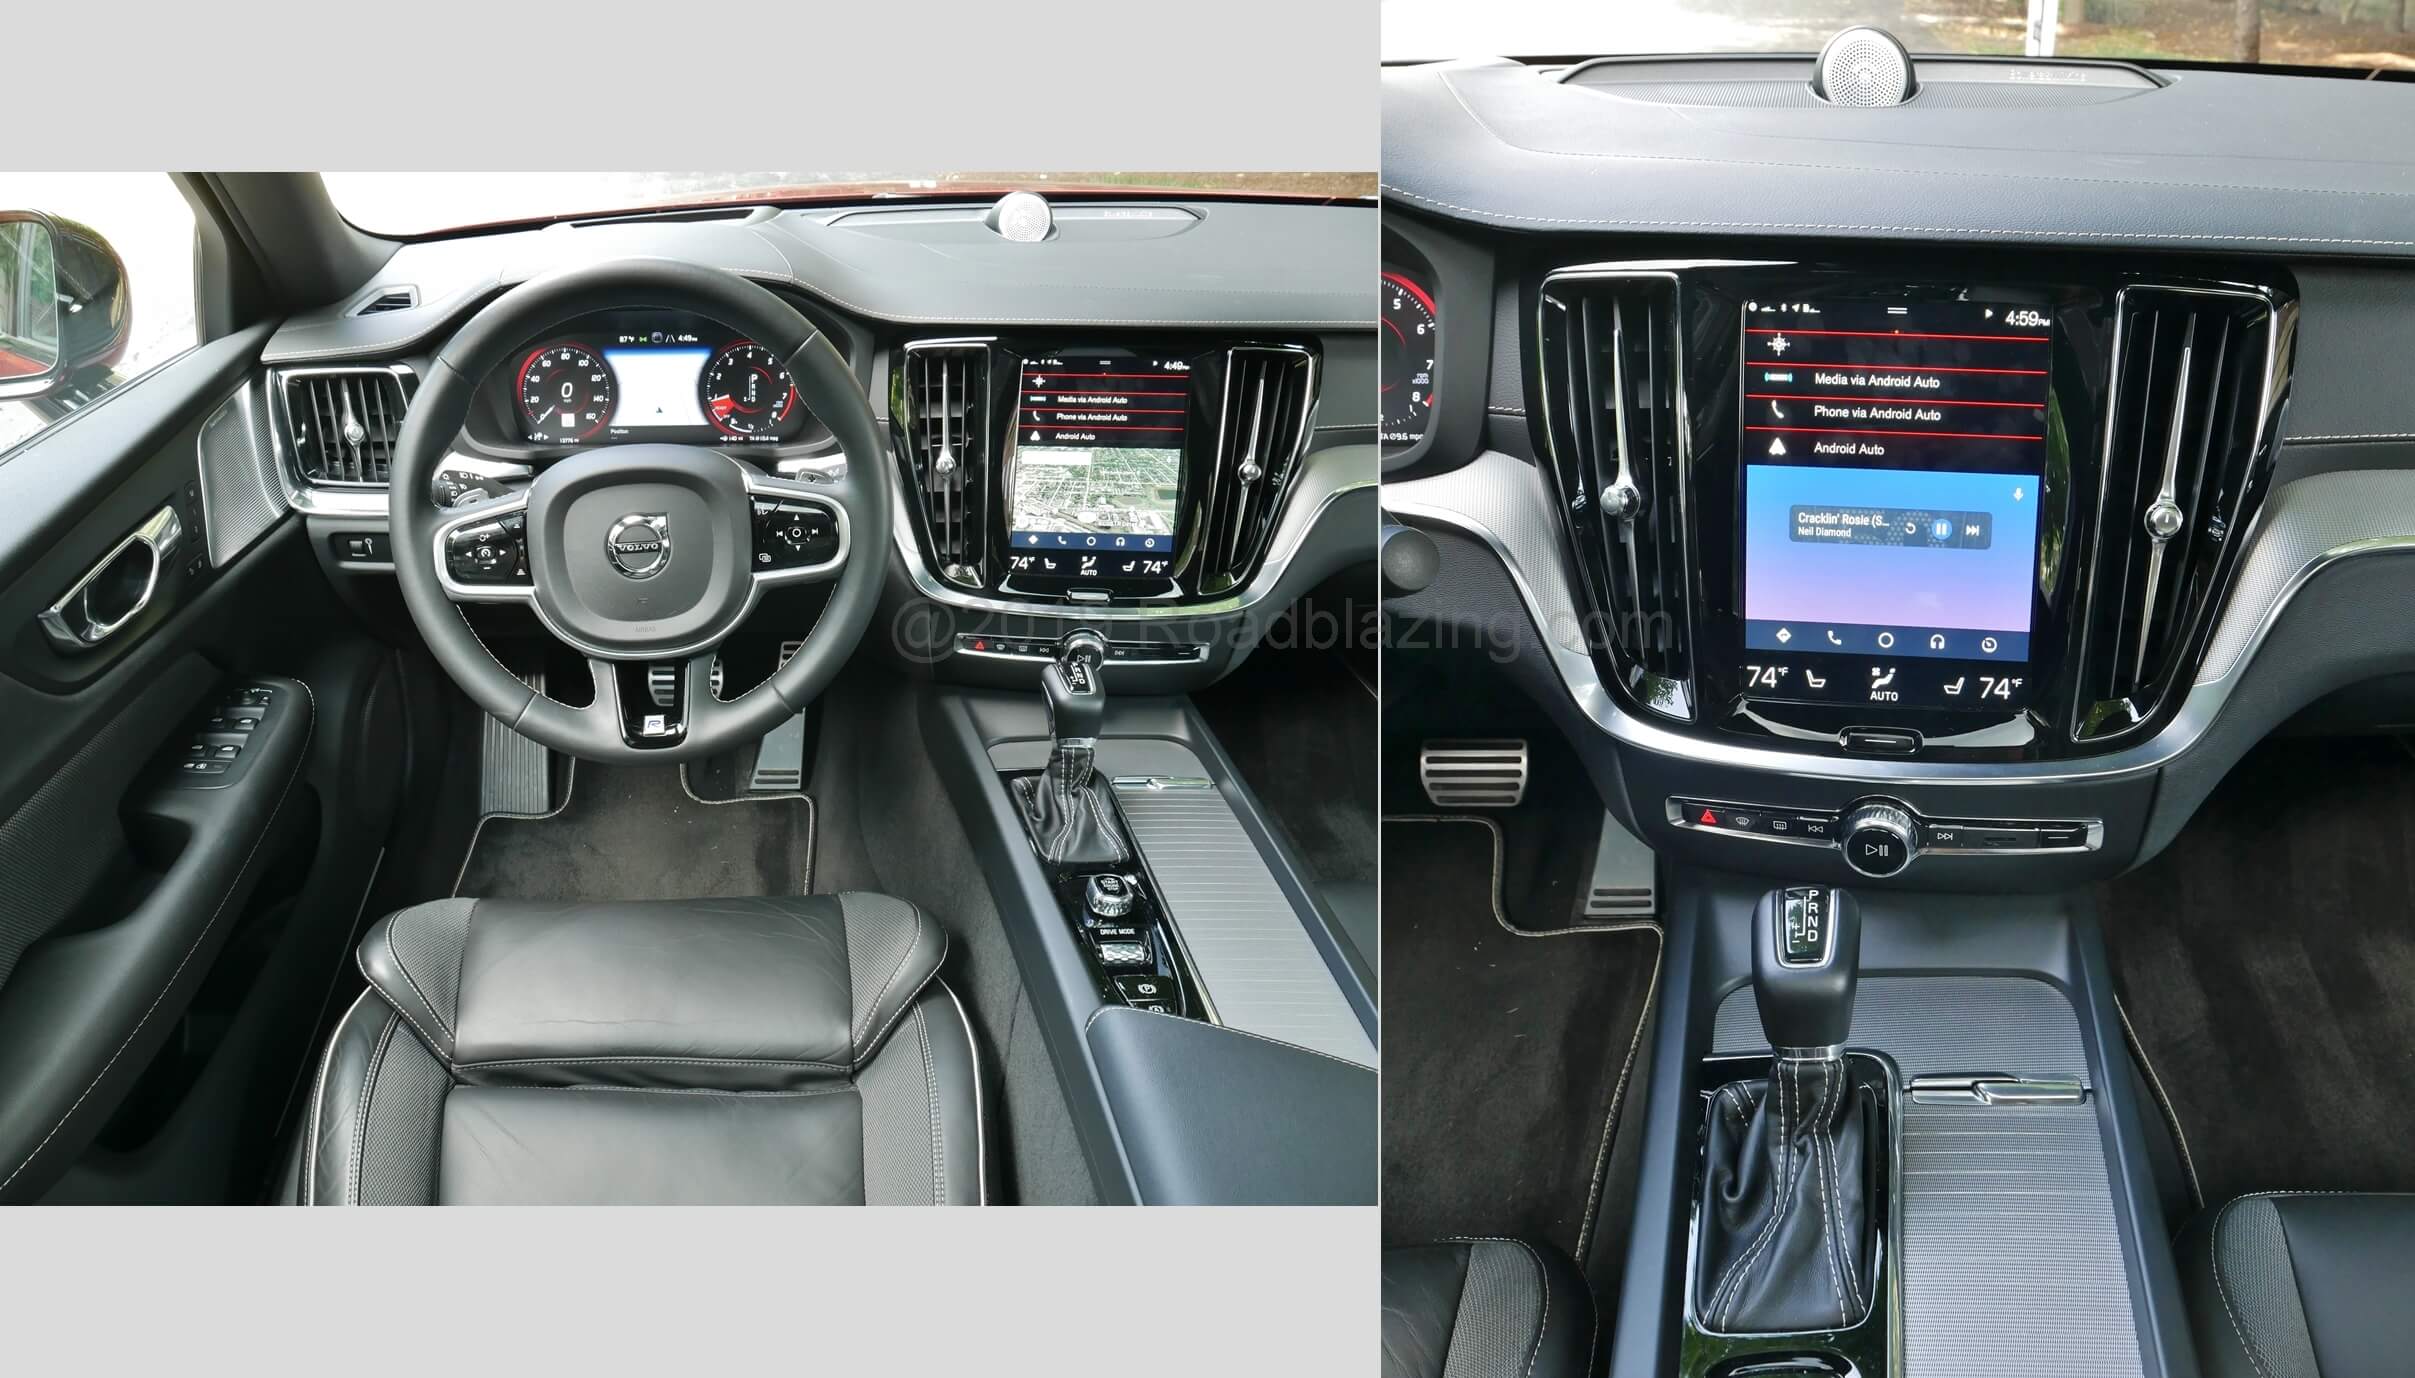 2019 Volvo S60 T6 R-Design: Cockpit running on Android Auto